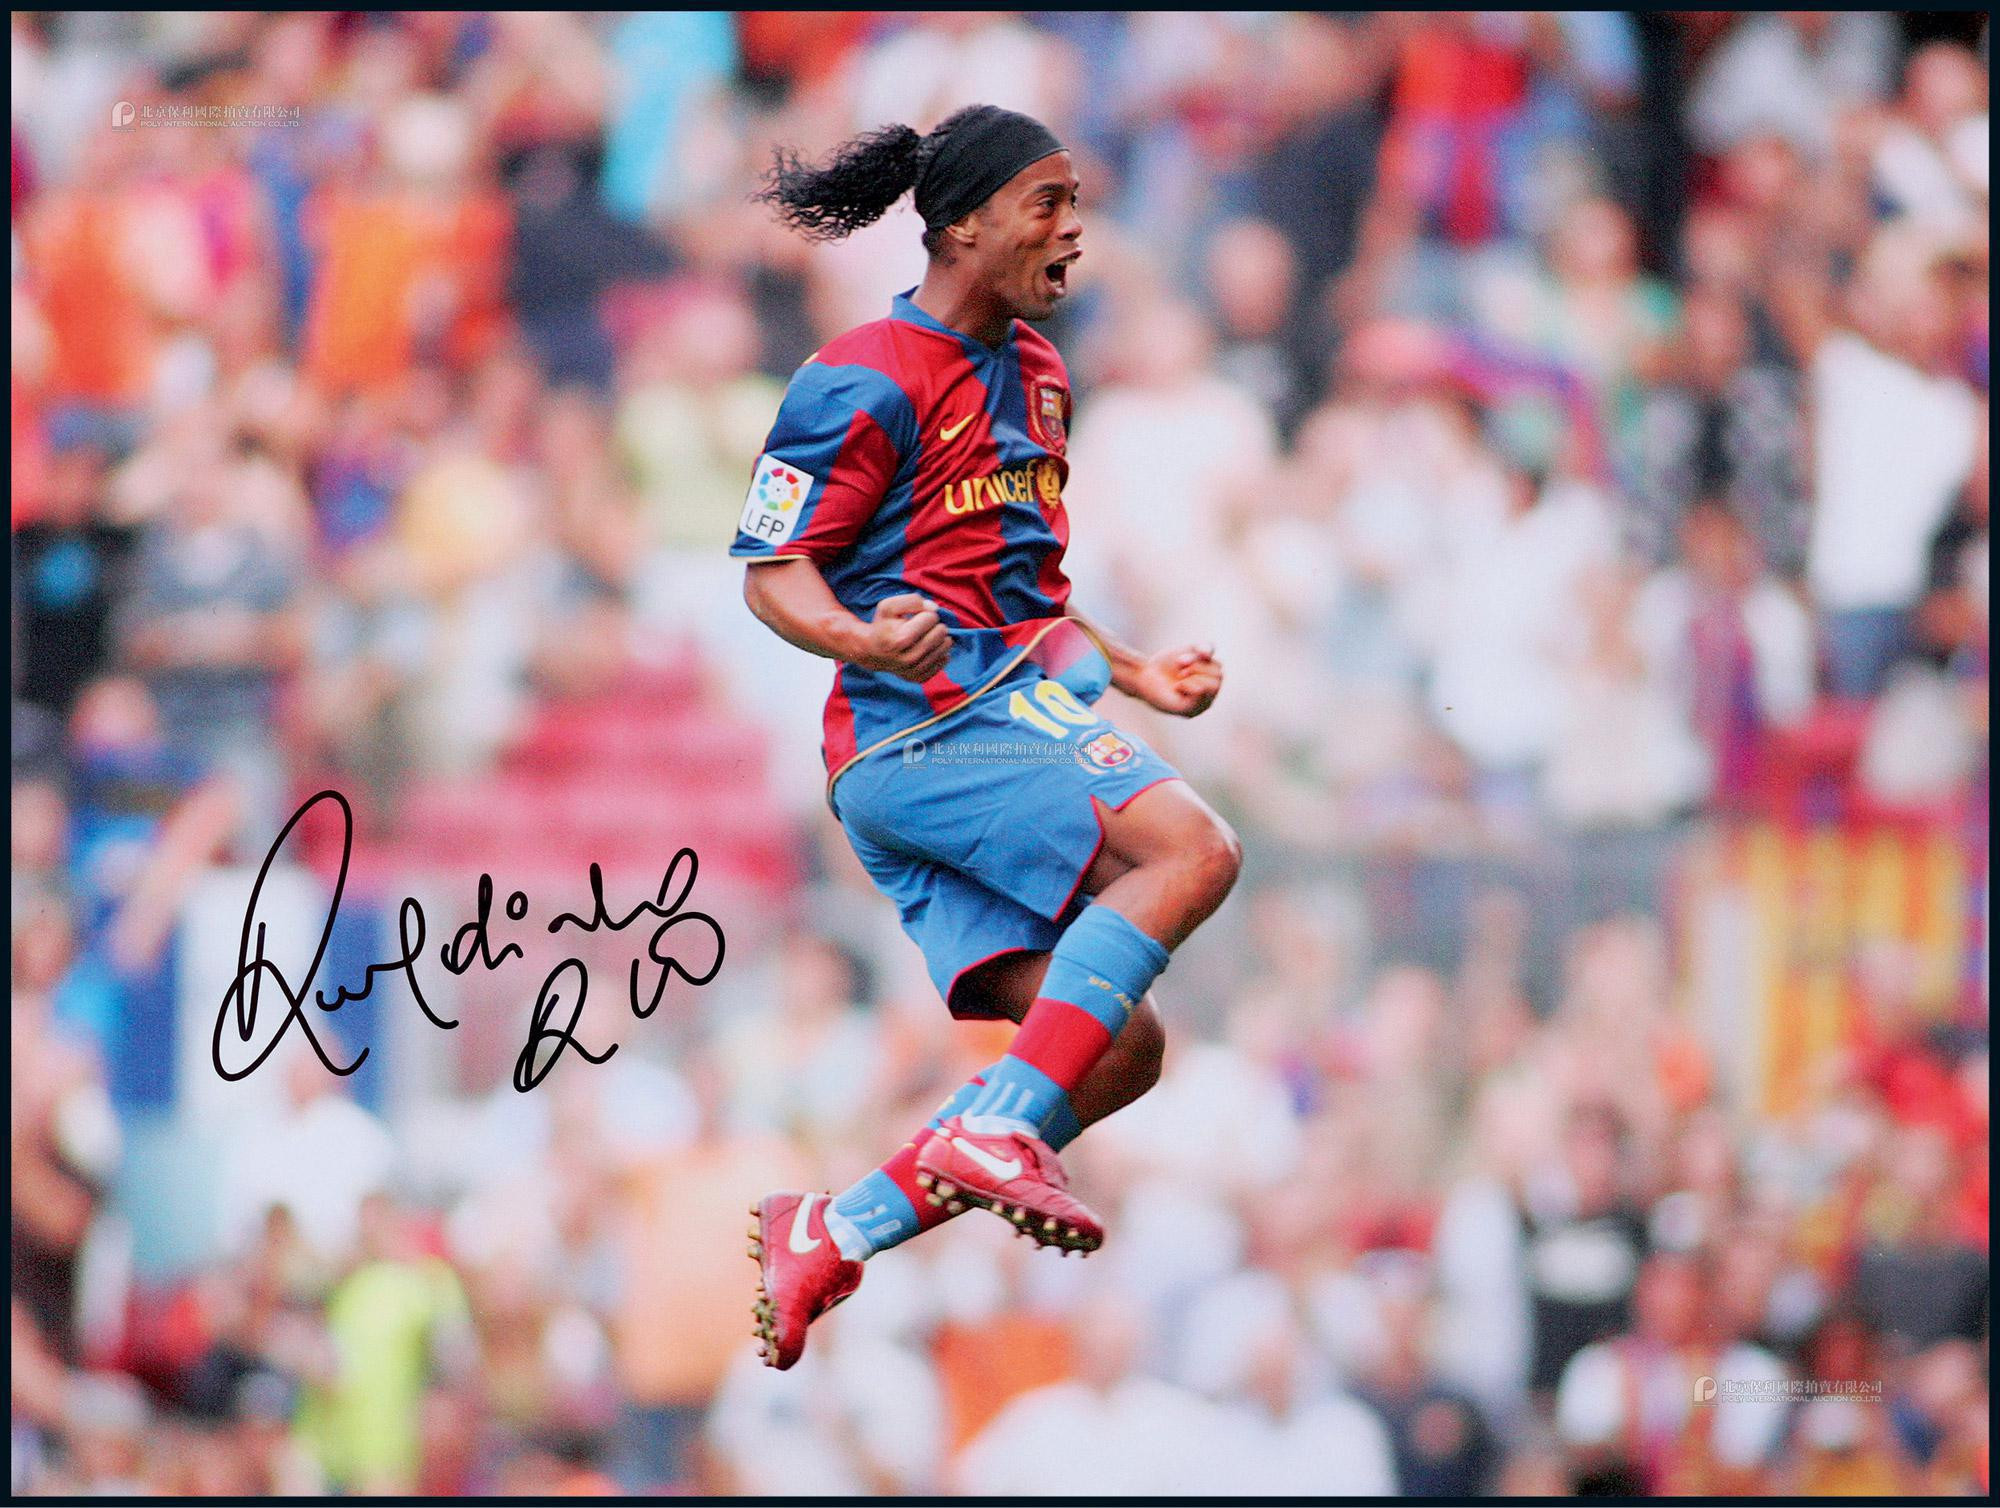 The autographed photo of Ronaldinho, the “FIFA world player”, with certificate